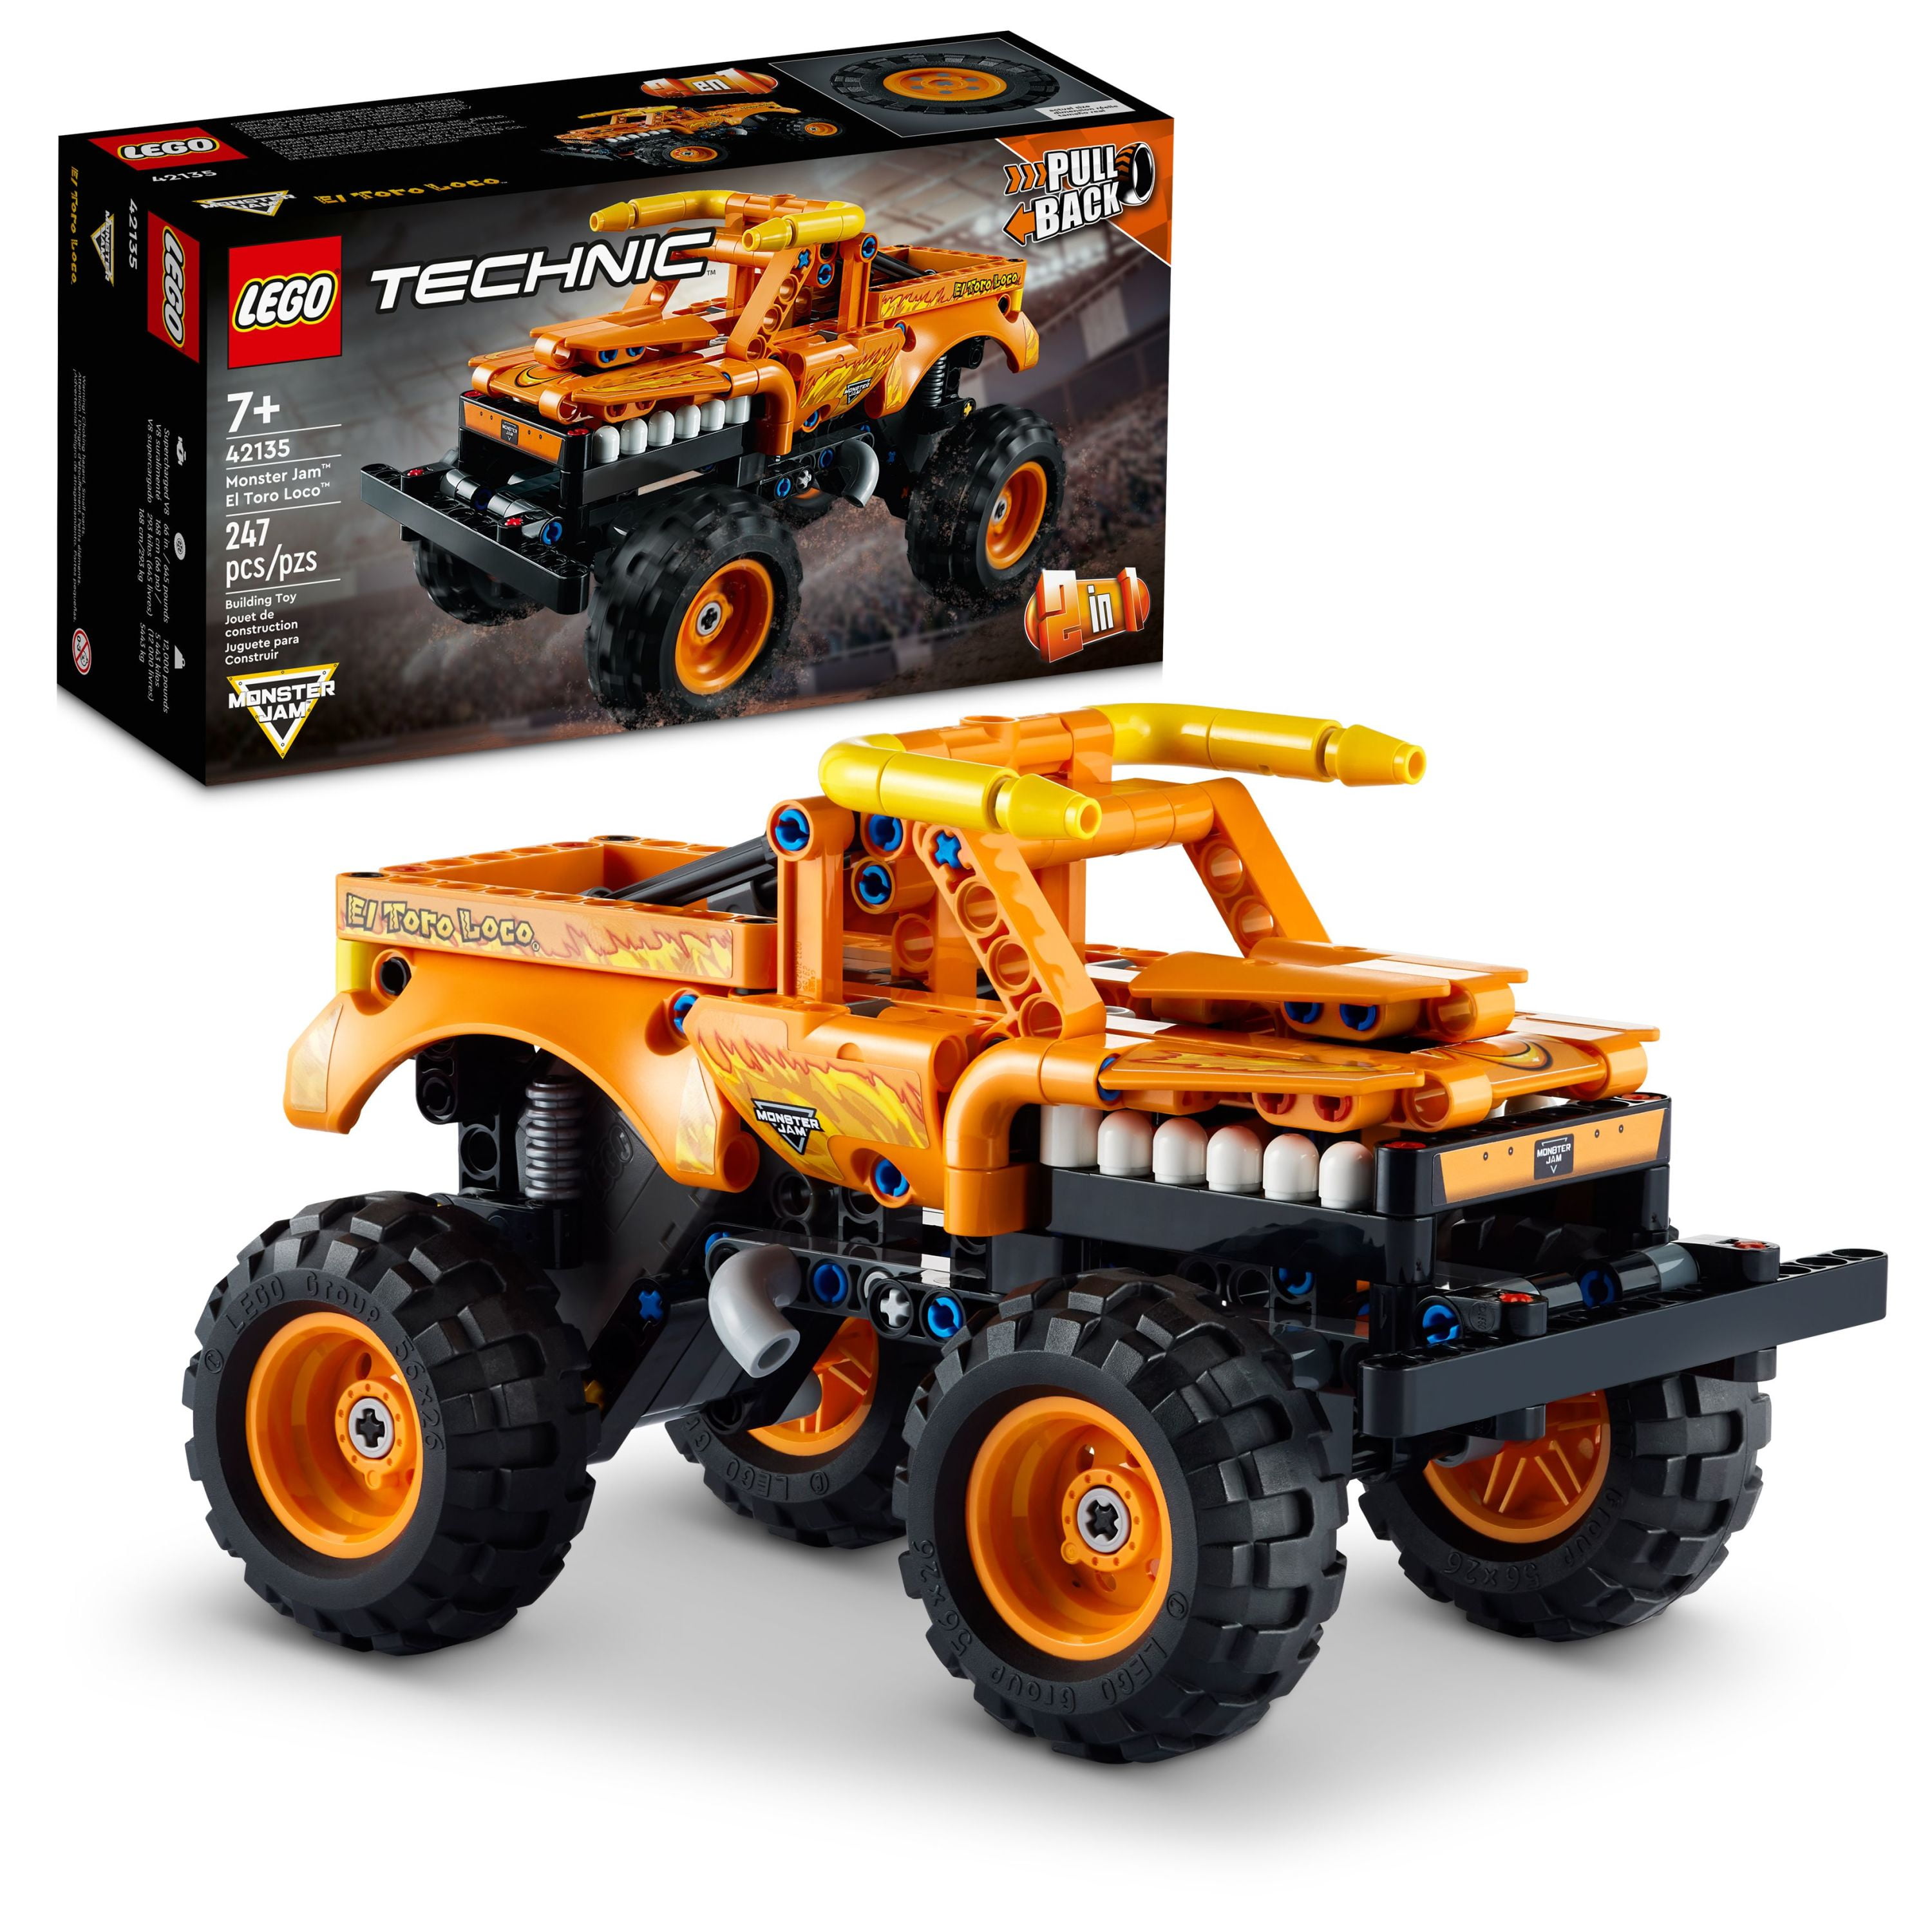 LEGO Technic Monster Jam El Toro Loco 42135 2 in 1 Back Truck to Off Roader Car Toy, for Kids, Boys and Girls 7 Plus Years Old - Walmart.com